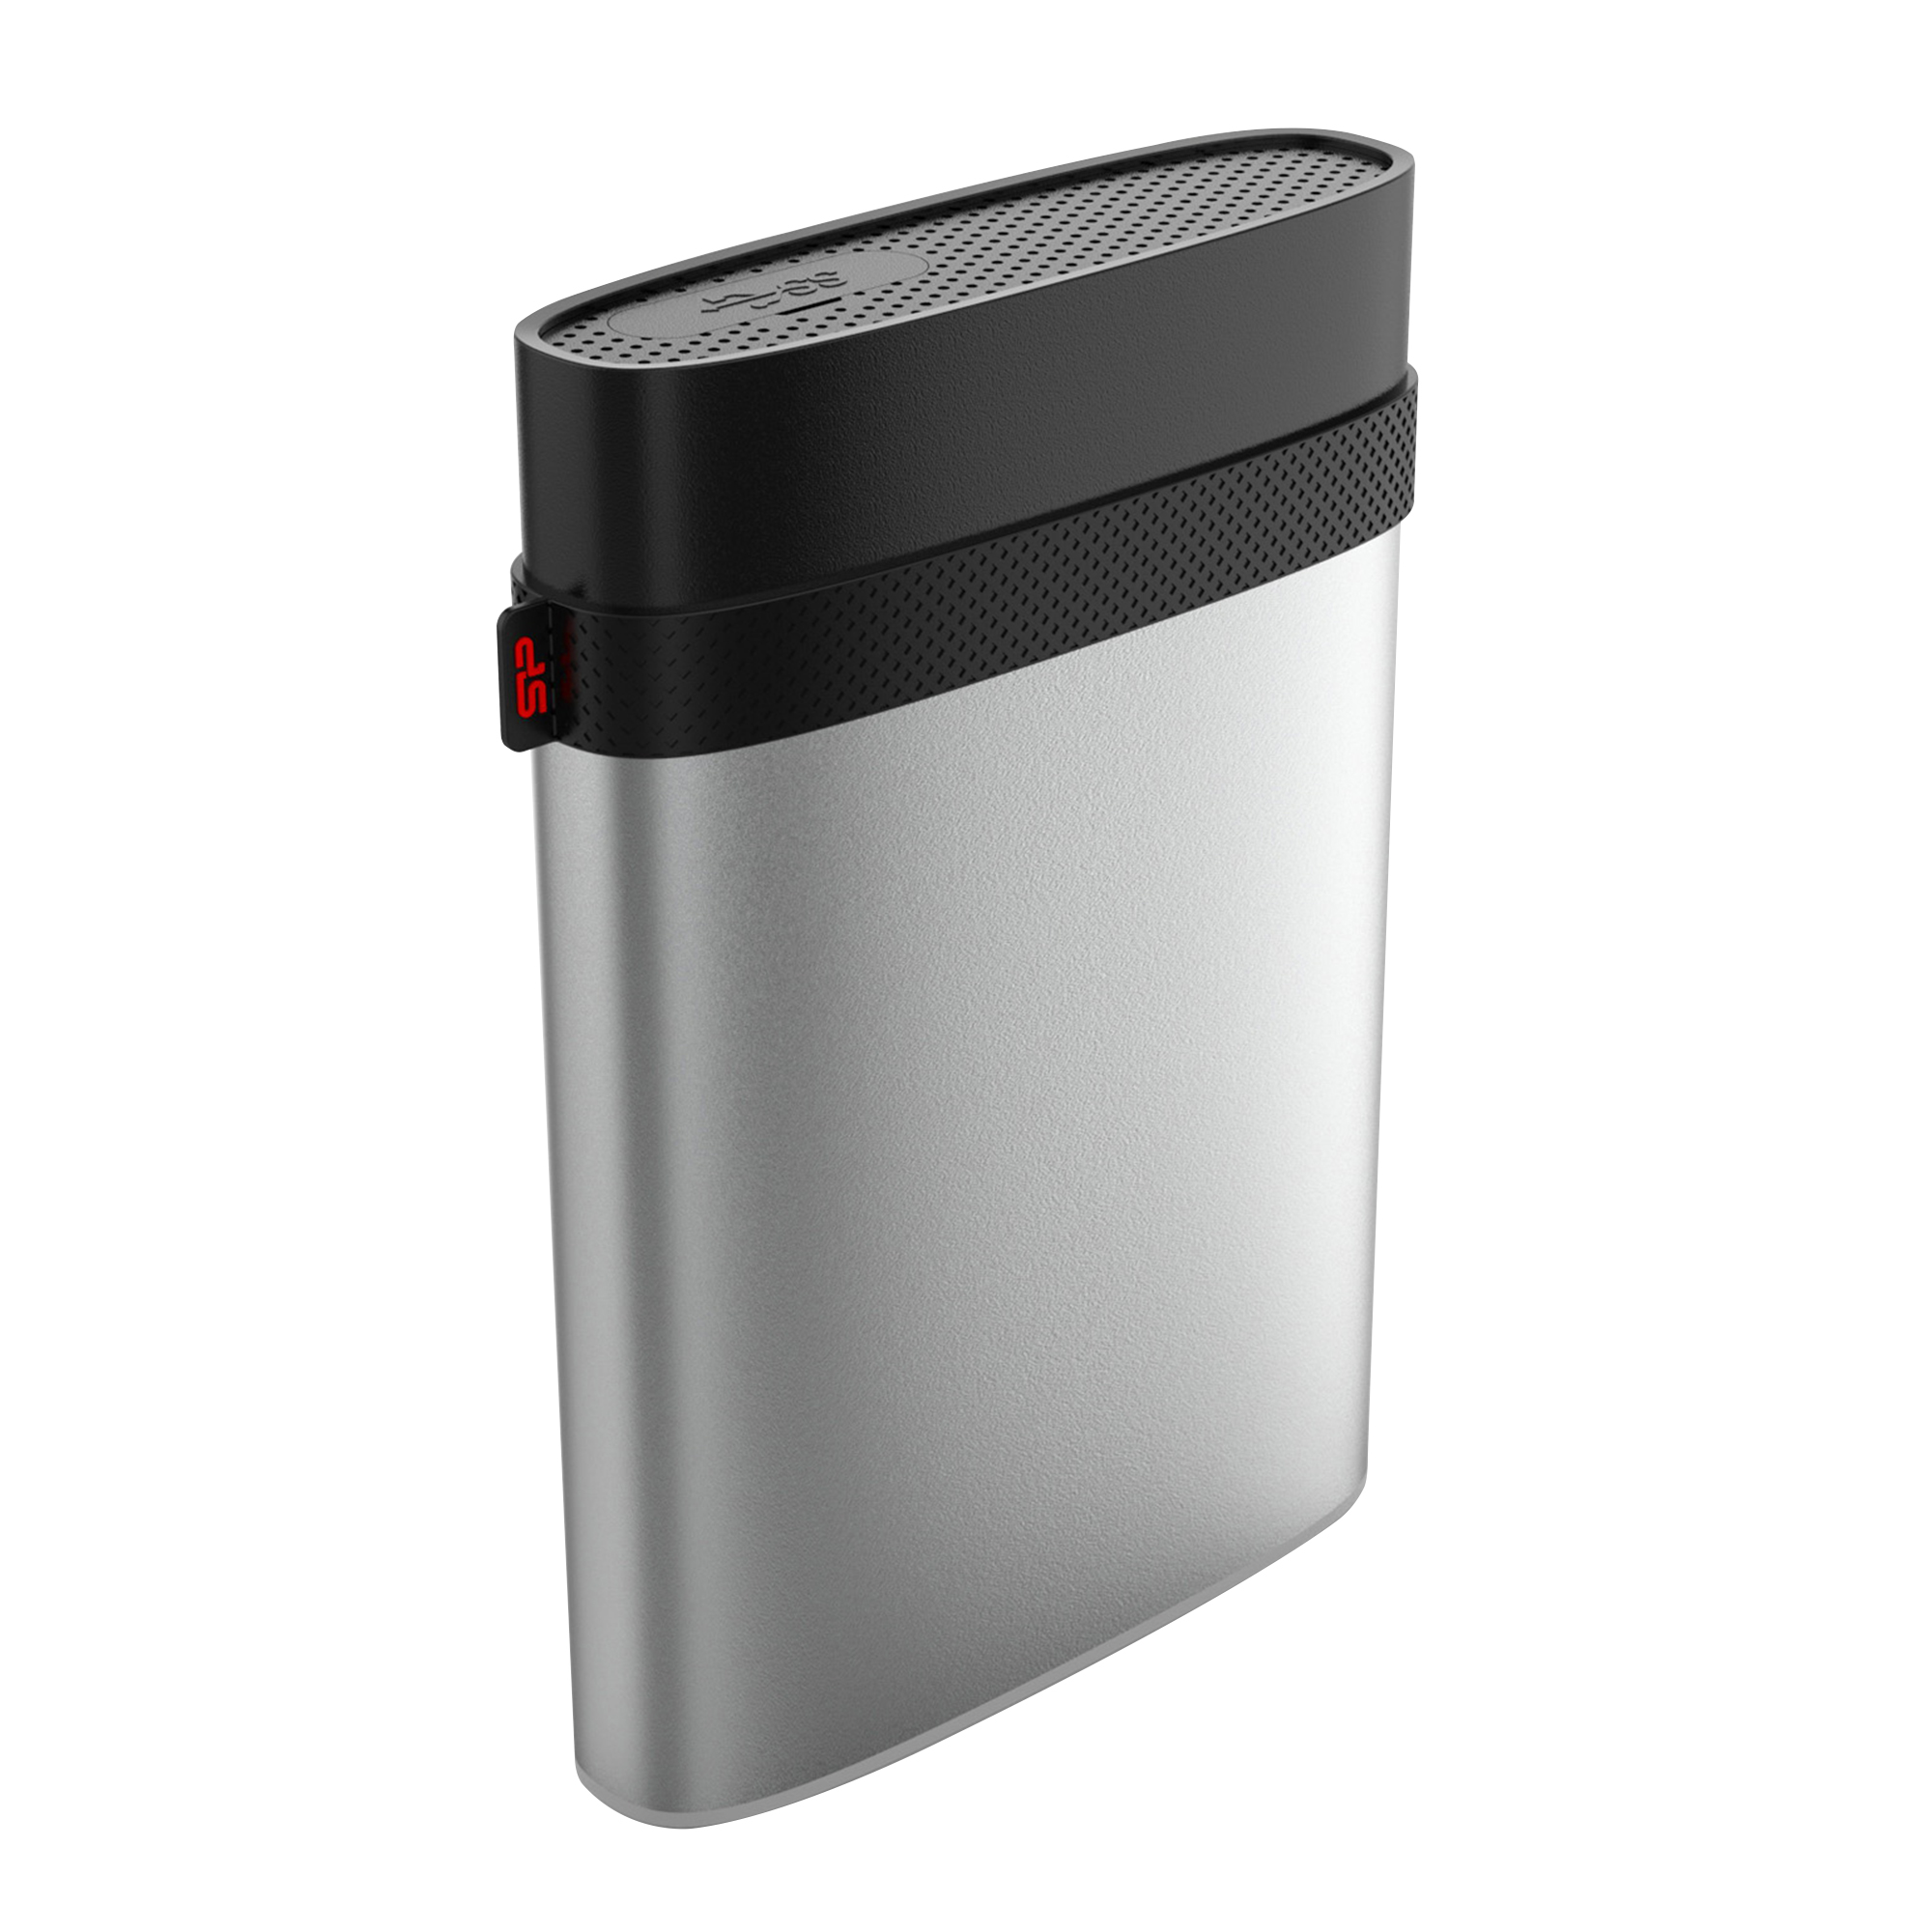 format 4tb drive for mac and windows